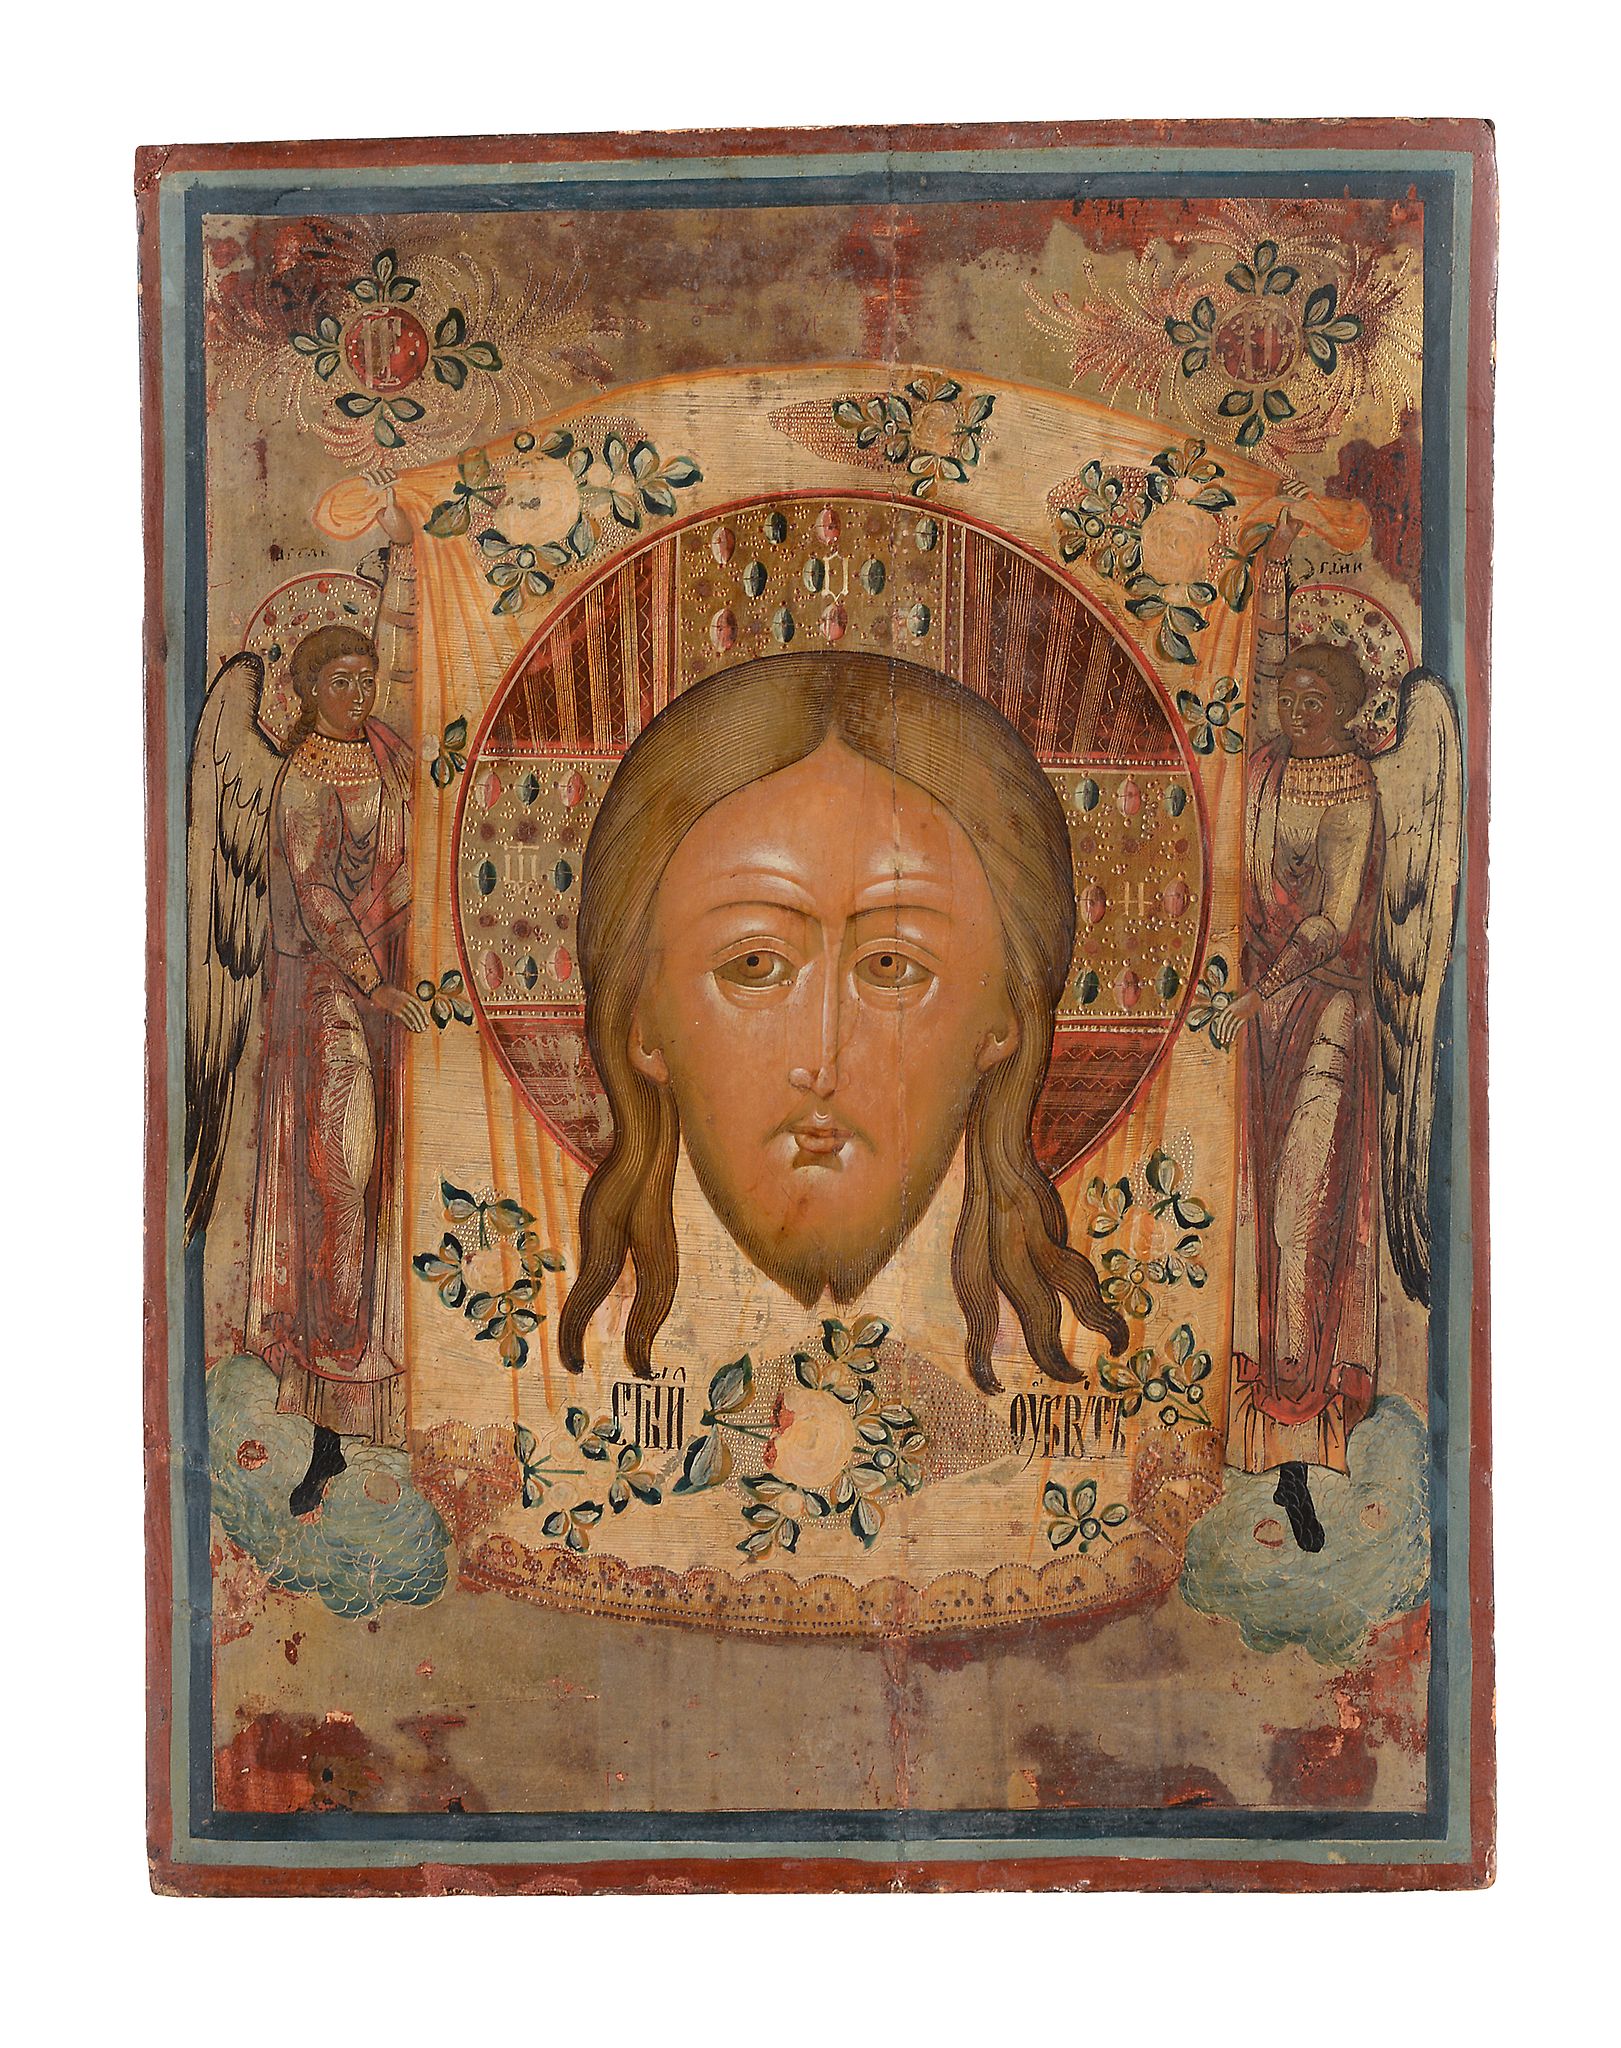 A central Russian polychrome painted and parcel gilt icon, possibly Mstera   A central Russian